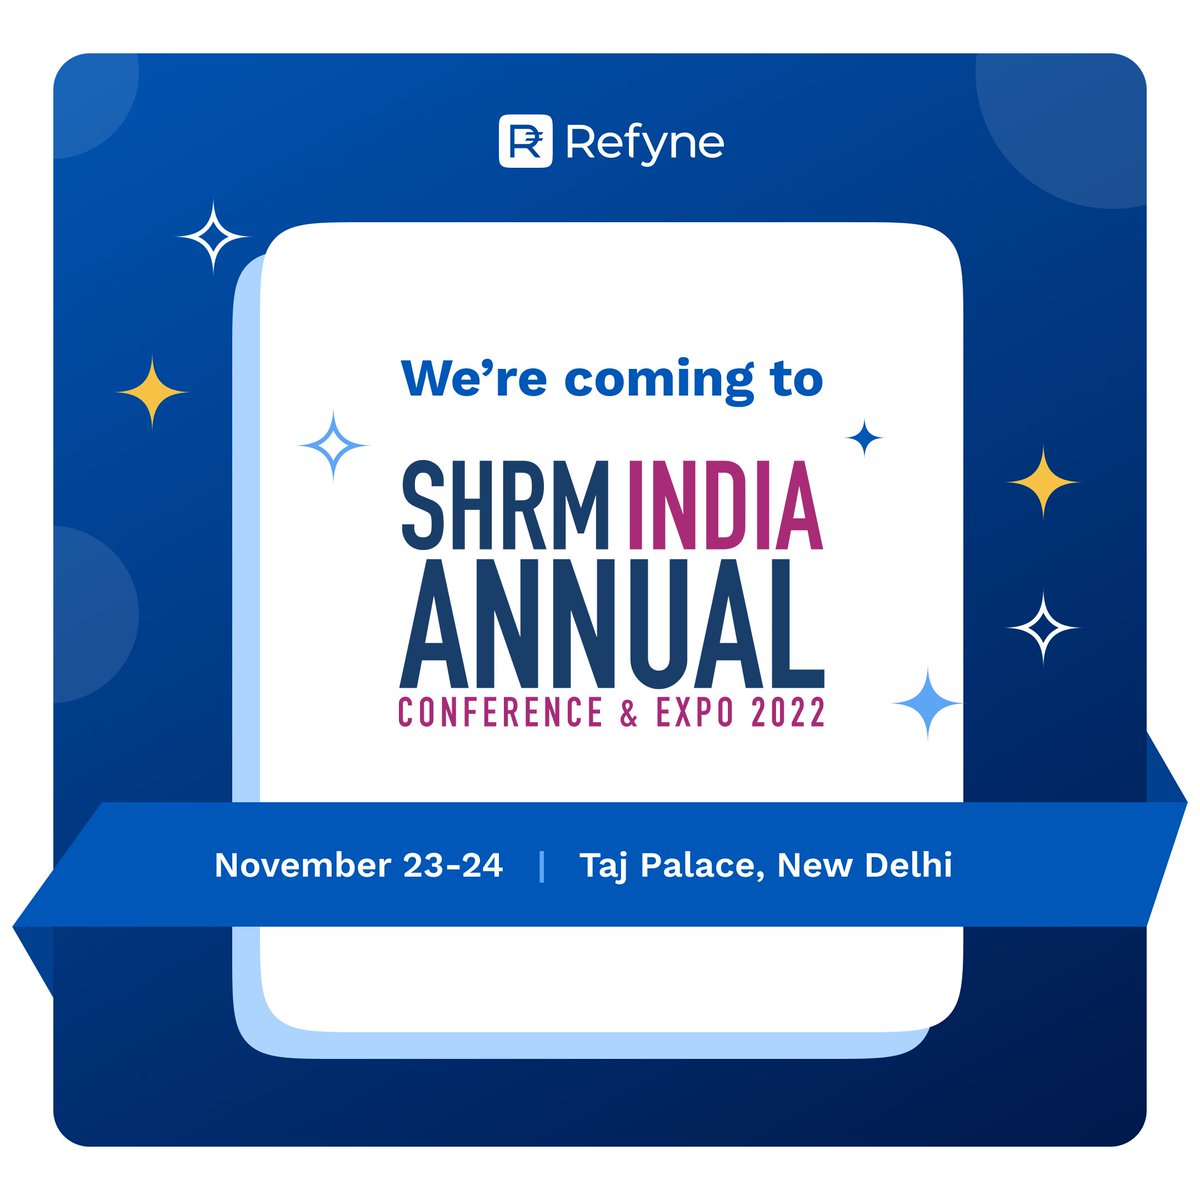 Dilli, we're coming for you! Refyne is delighted to be a part of #SHRMIAC22. We're excited to meet all the delegates at the show and discuss the importance of #financialwellness in the workplace. @SHRMindia @SHRM